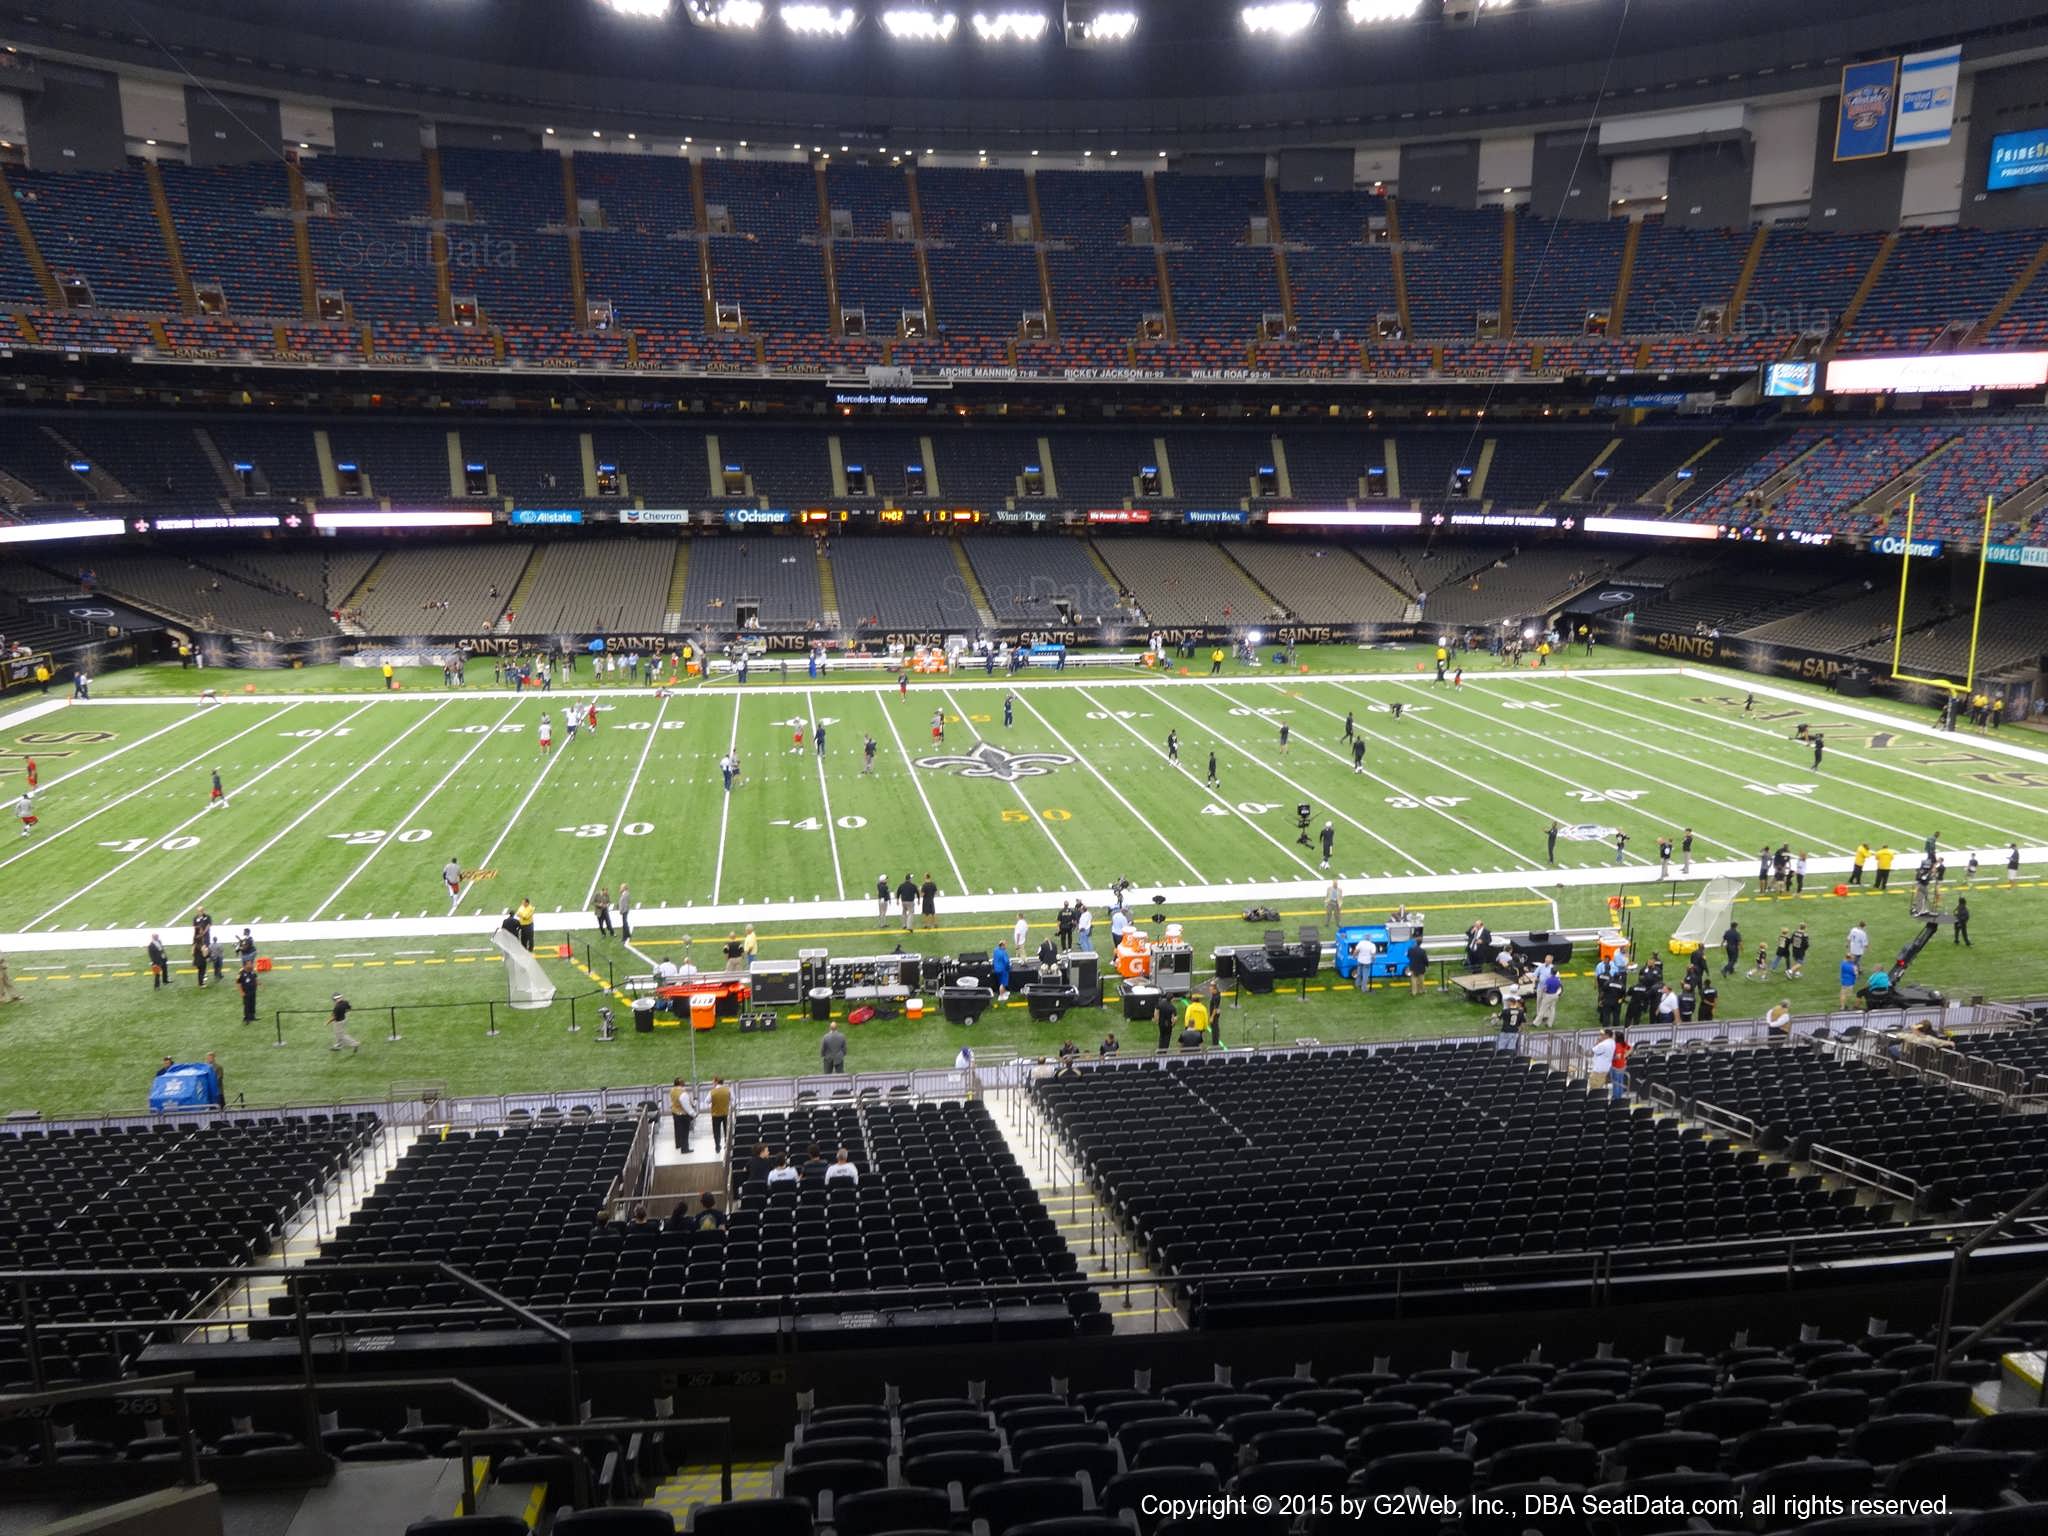 Seat view from section 337 at the Mercedes-Benz Superdome, home of the New Orleans Saints